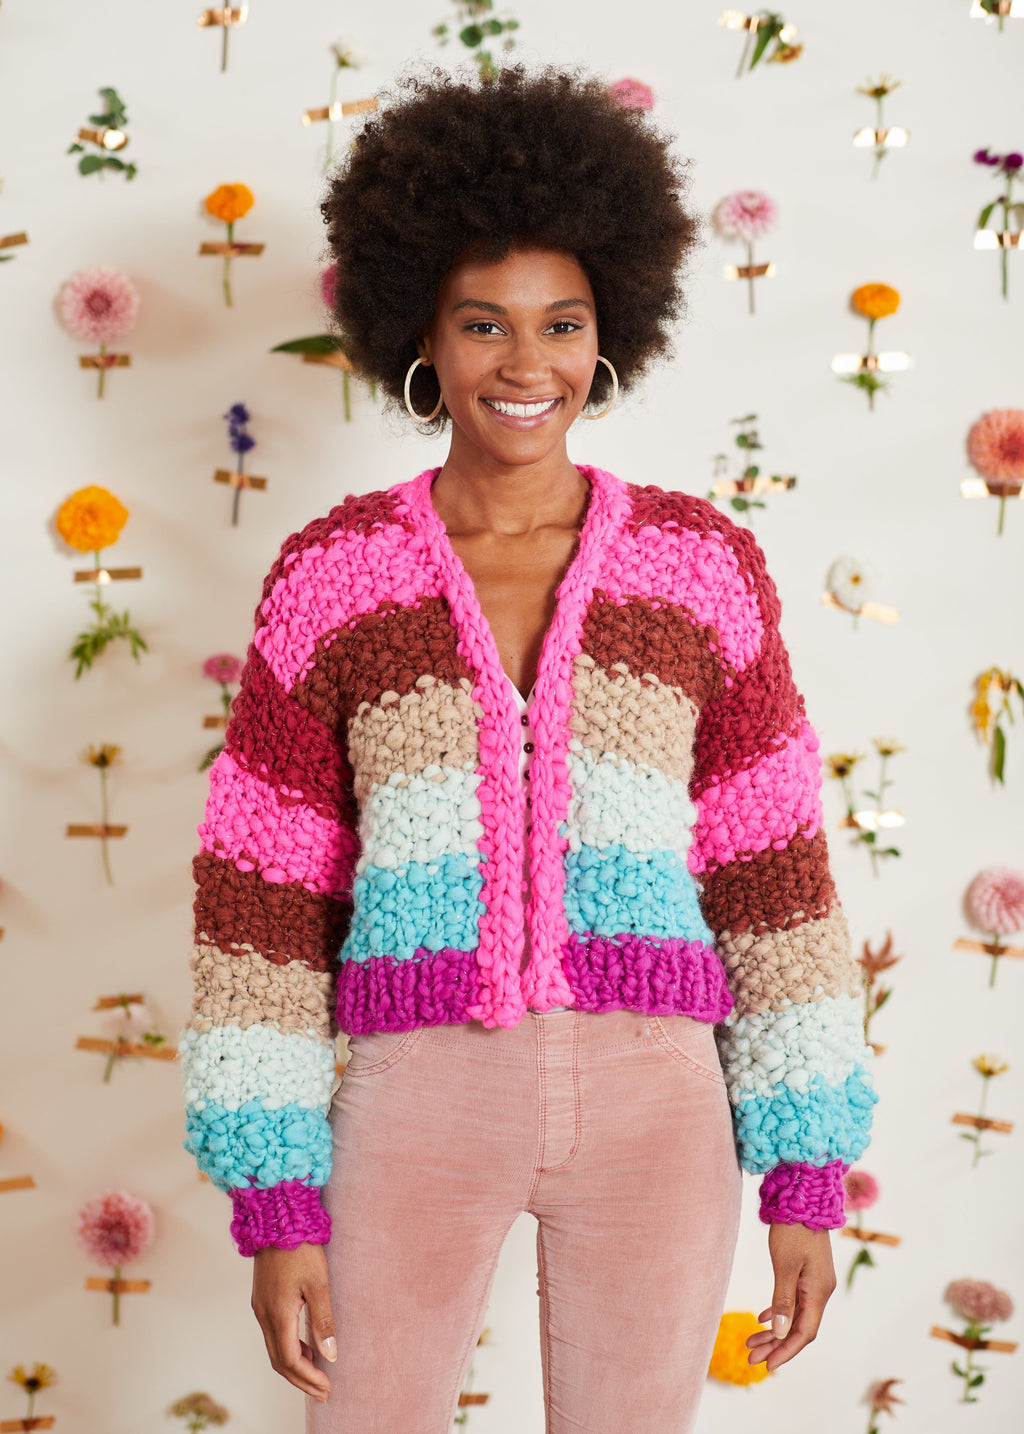 Woman wearing bright colored handknit cardigan